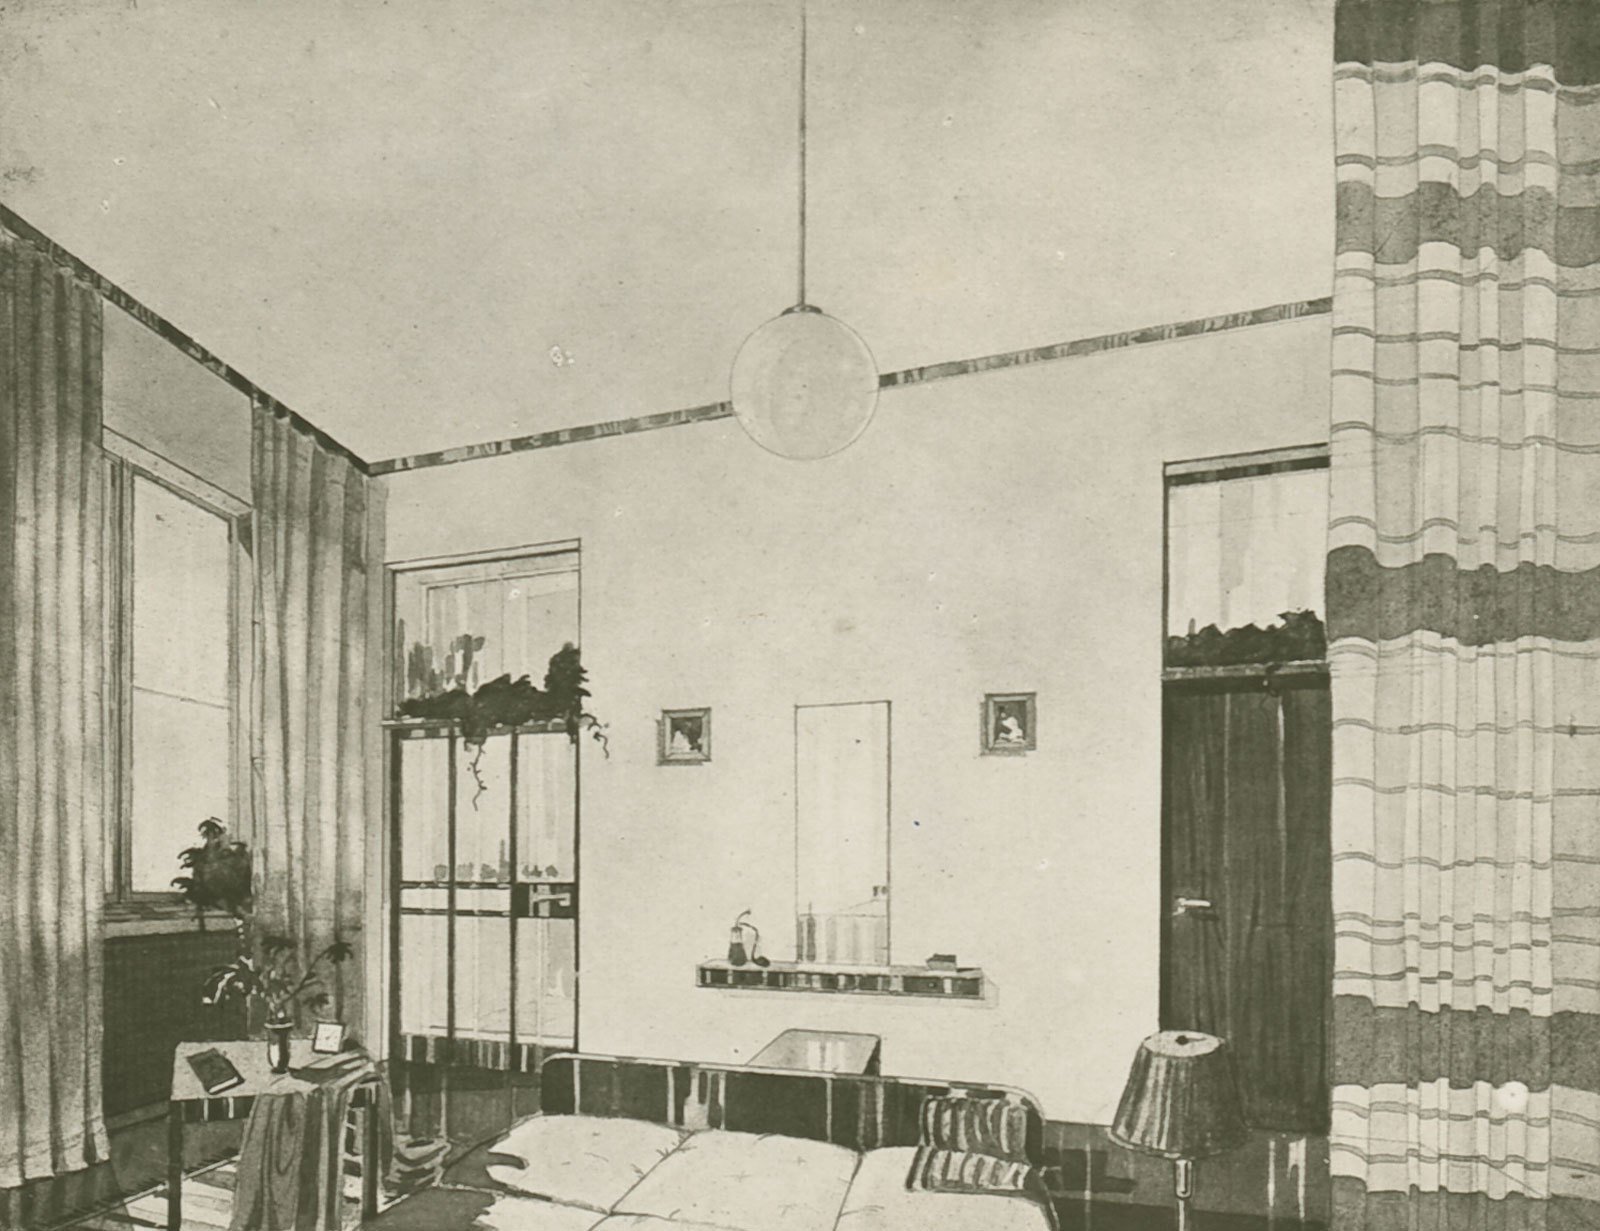 Antonin Urban, Perspective and wall elevations of the bedroom of a living unit,193516.5 &times; 23.5 cmPhotographic reproductionModernist Archive, Bauhaus University, Weimar